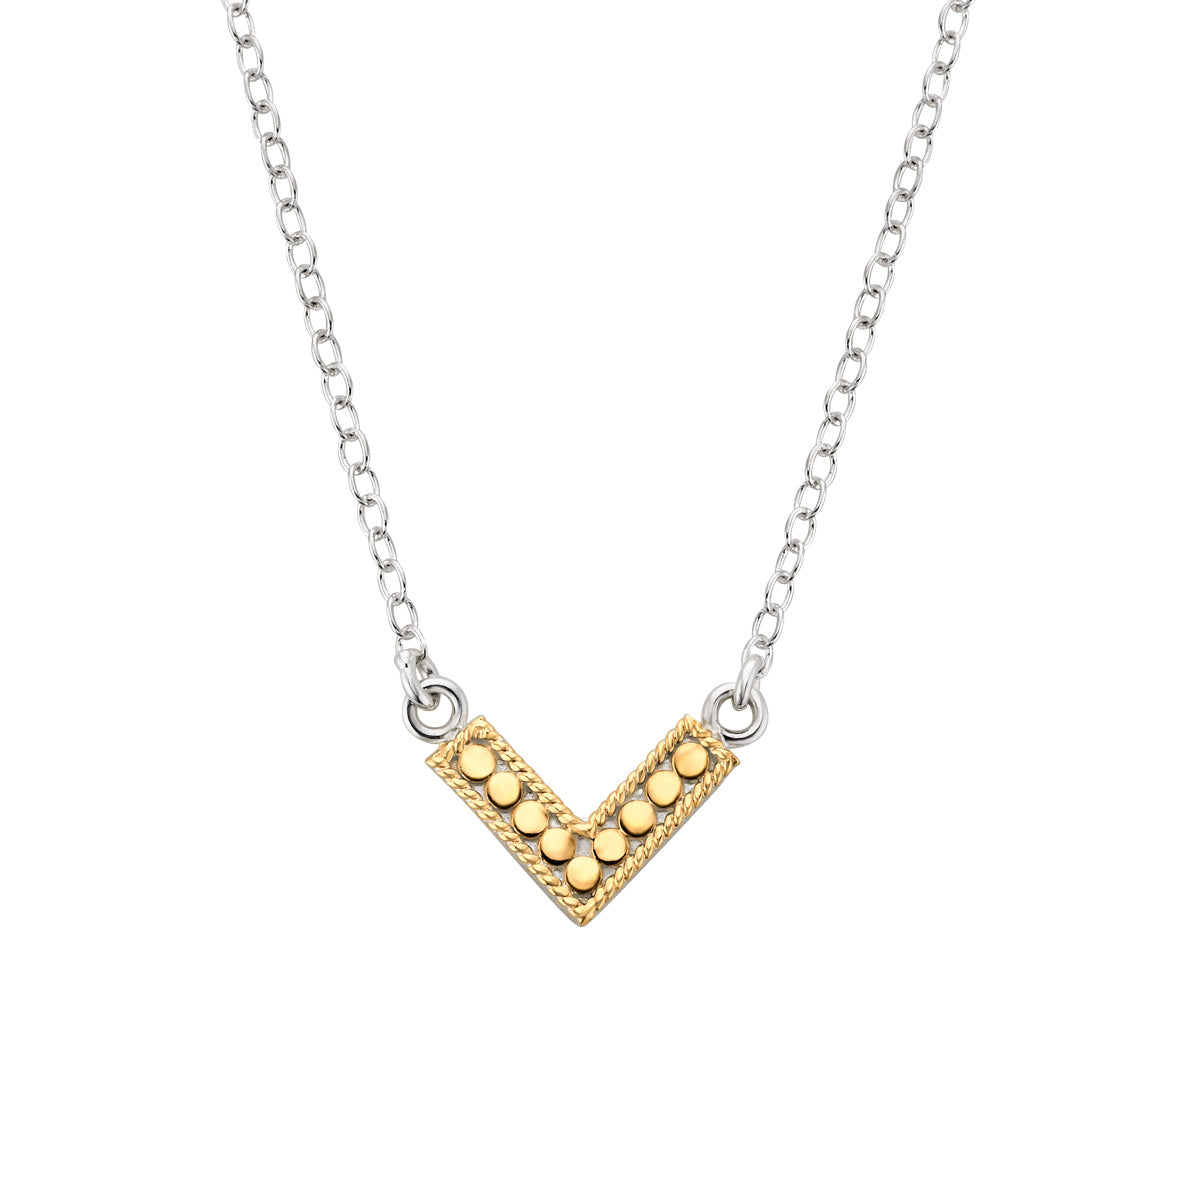 Ana Beck 18k gold plated and sterling silver Mini Reversible V Necklace